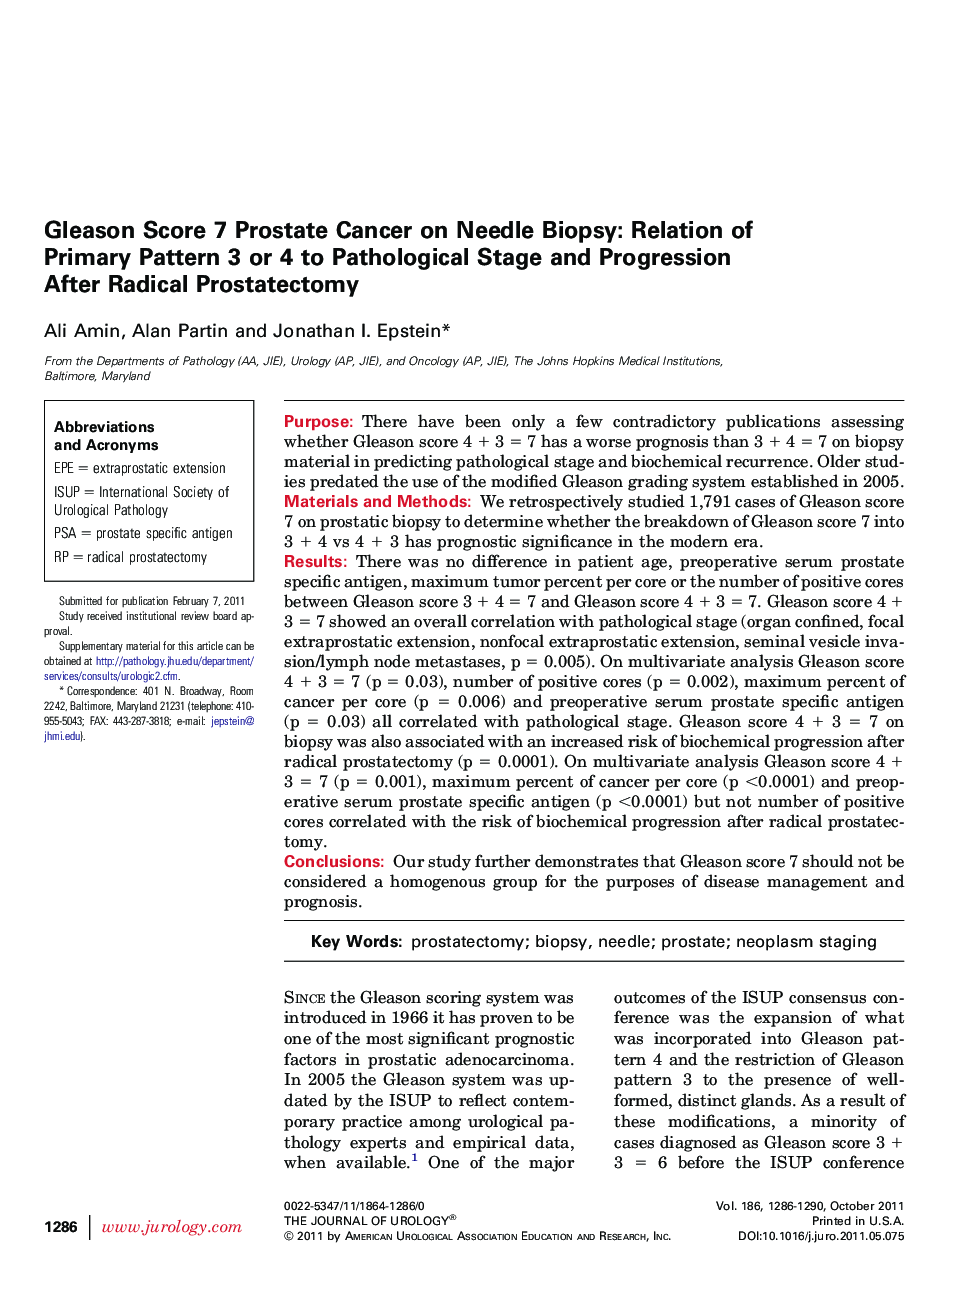 Gleason Score 7 Prostate Cancer on Needle Biopsy: Relation of Primary Pattern 3 or 4 to Pathological Stage and Progression After Radical Prostatectomy